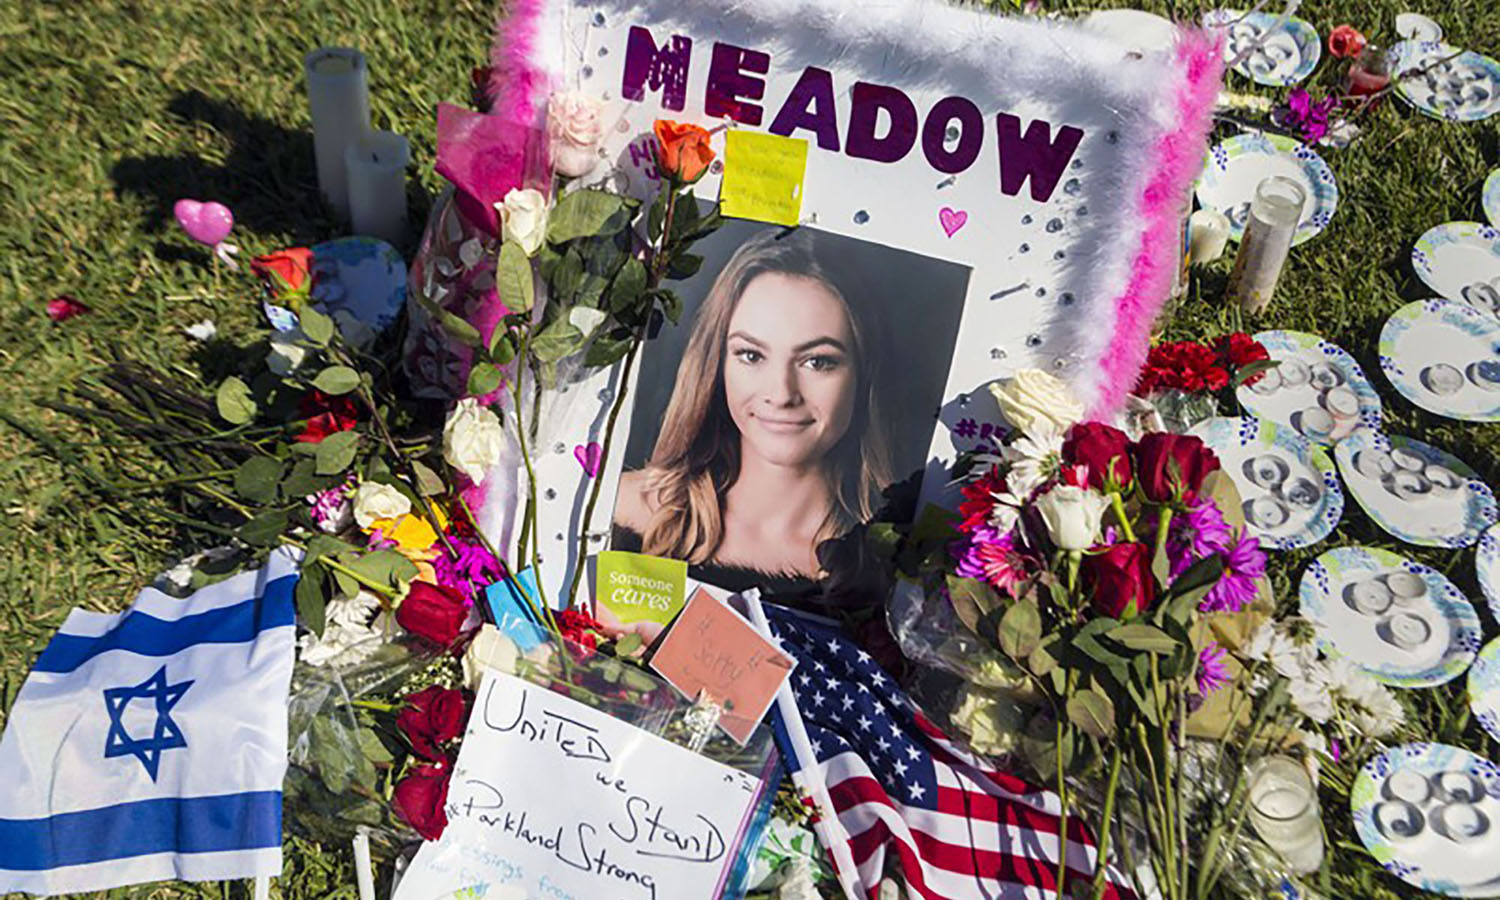 New Date Set for 'Ride for Meadow' Fundraiser